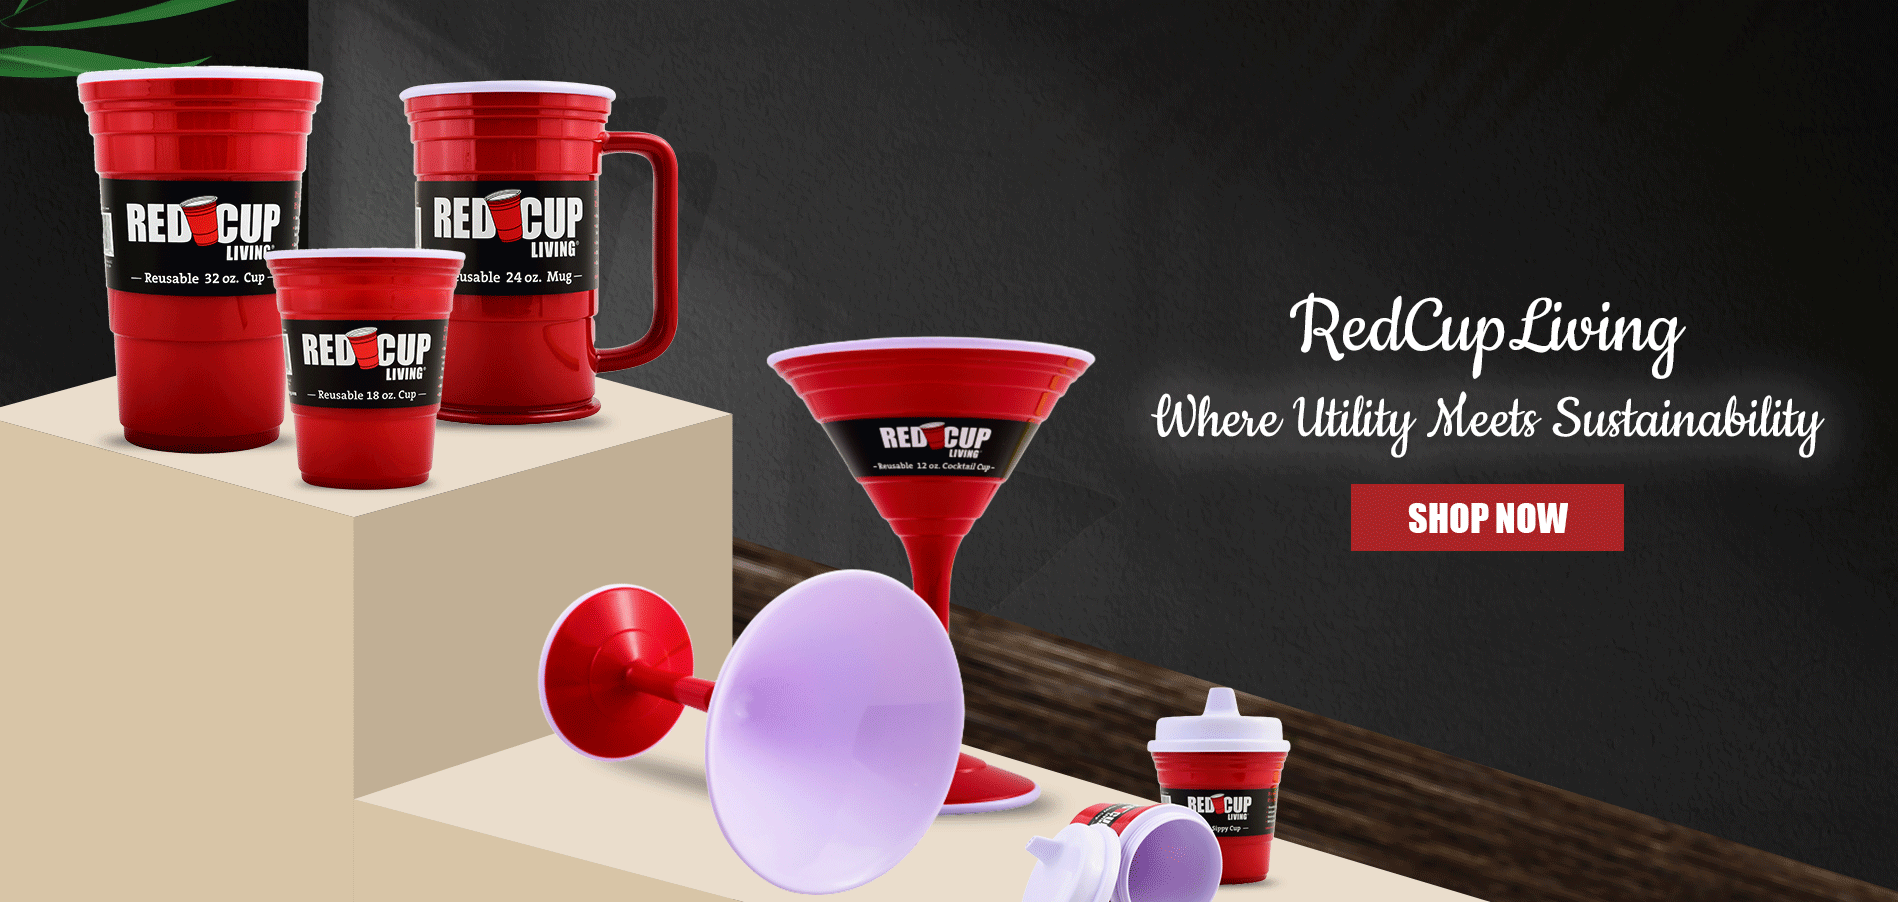 12oz Reusable Cocktail Cups | Red Cocktail Cups